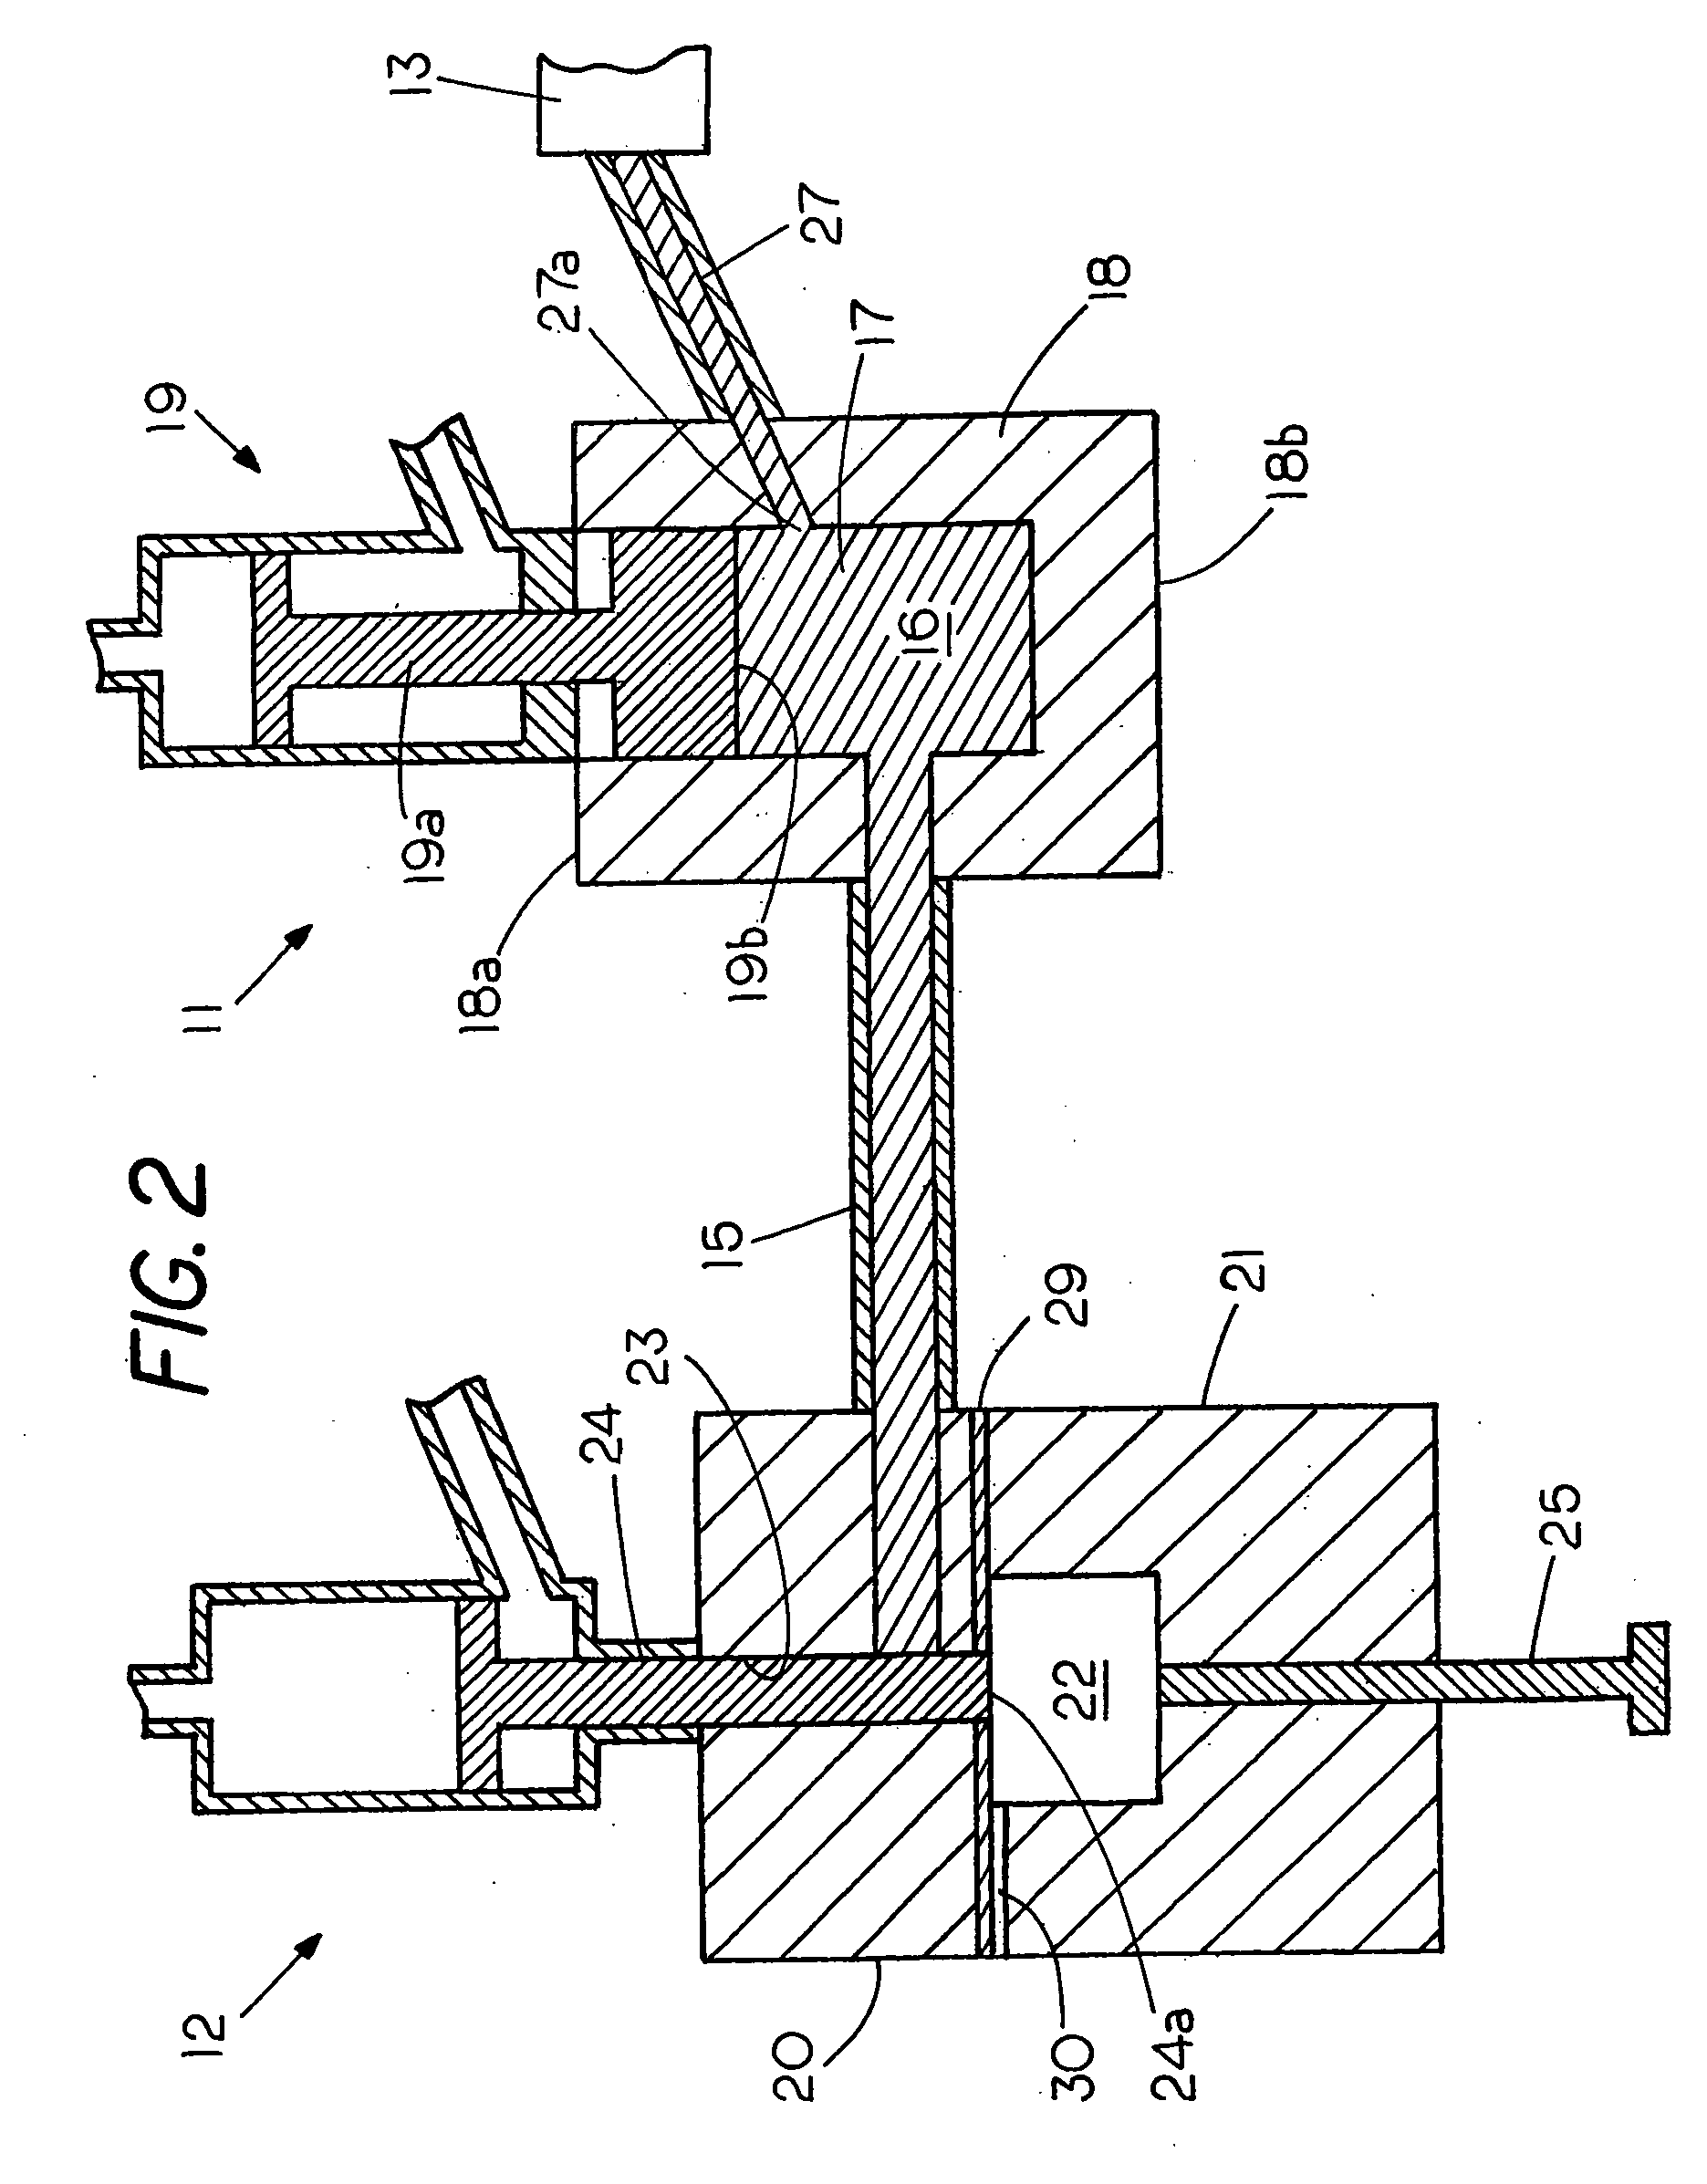 Molding of die-cast product and method of